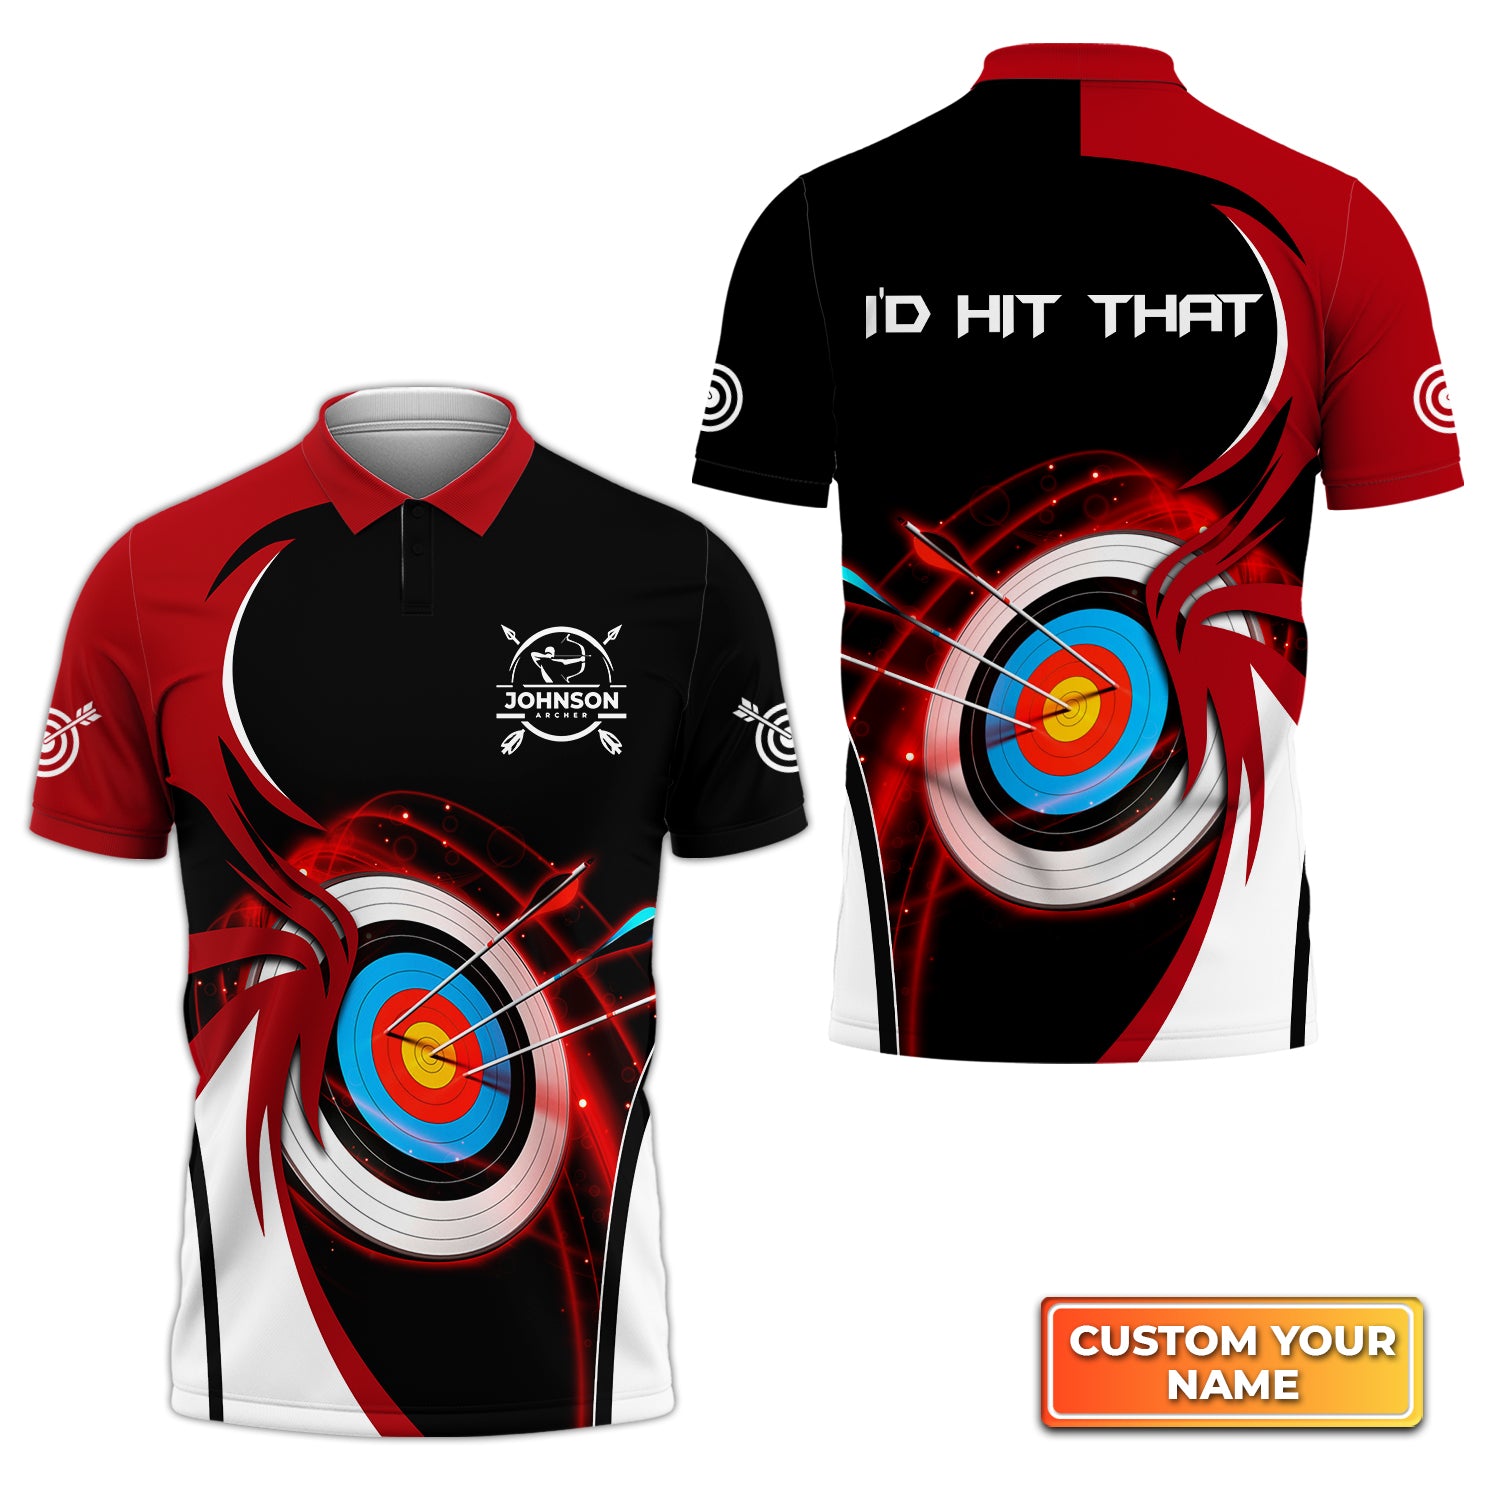 Archery Target I'd Hit That Personalized Name 3D Polo Shirt QB95 Gift For Archer